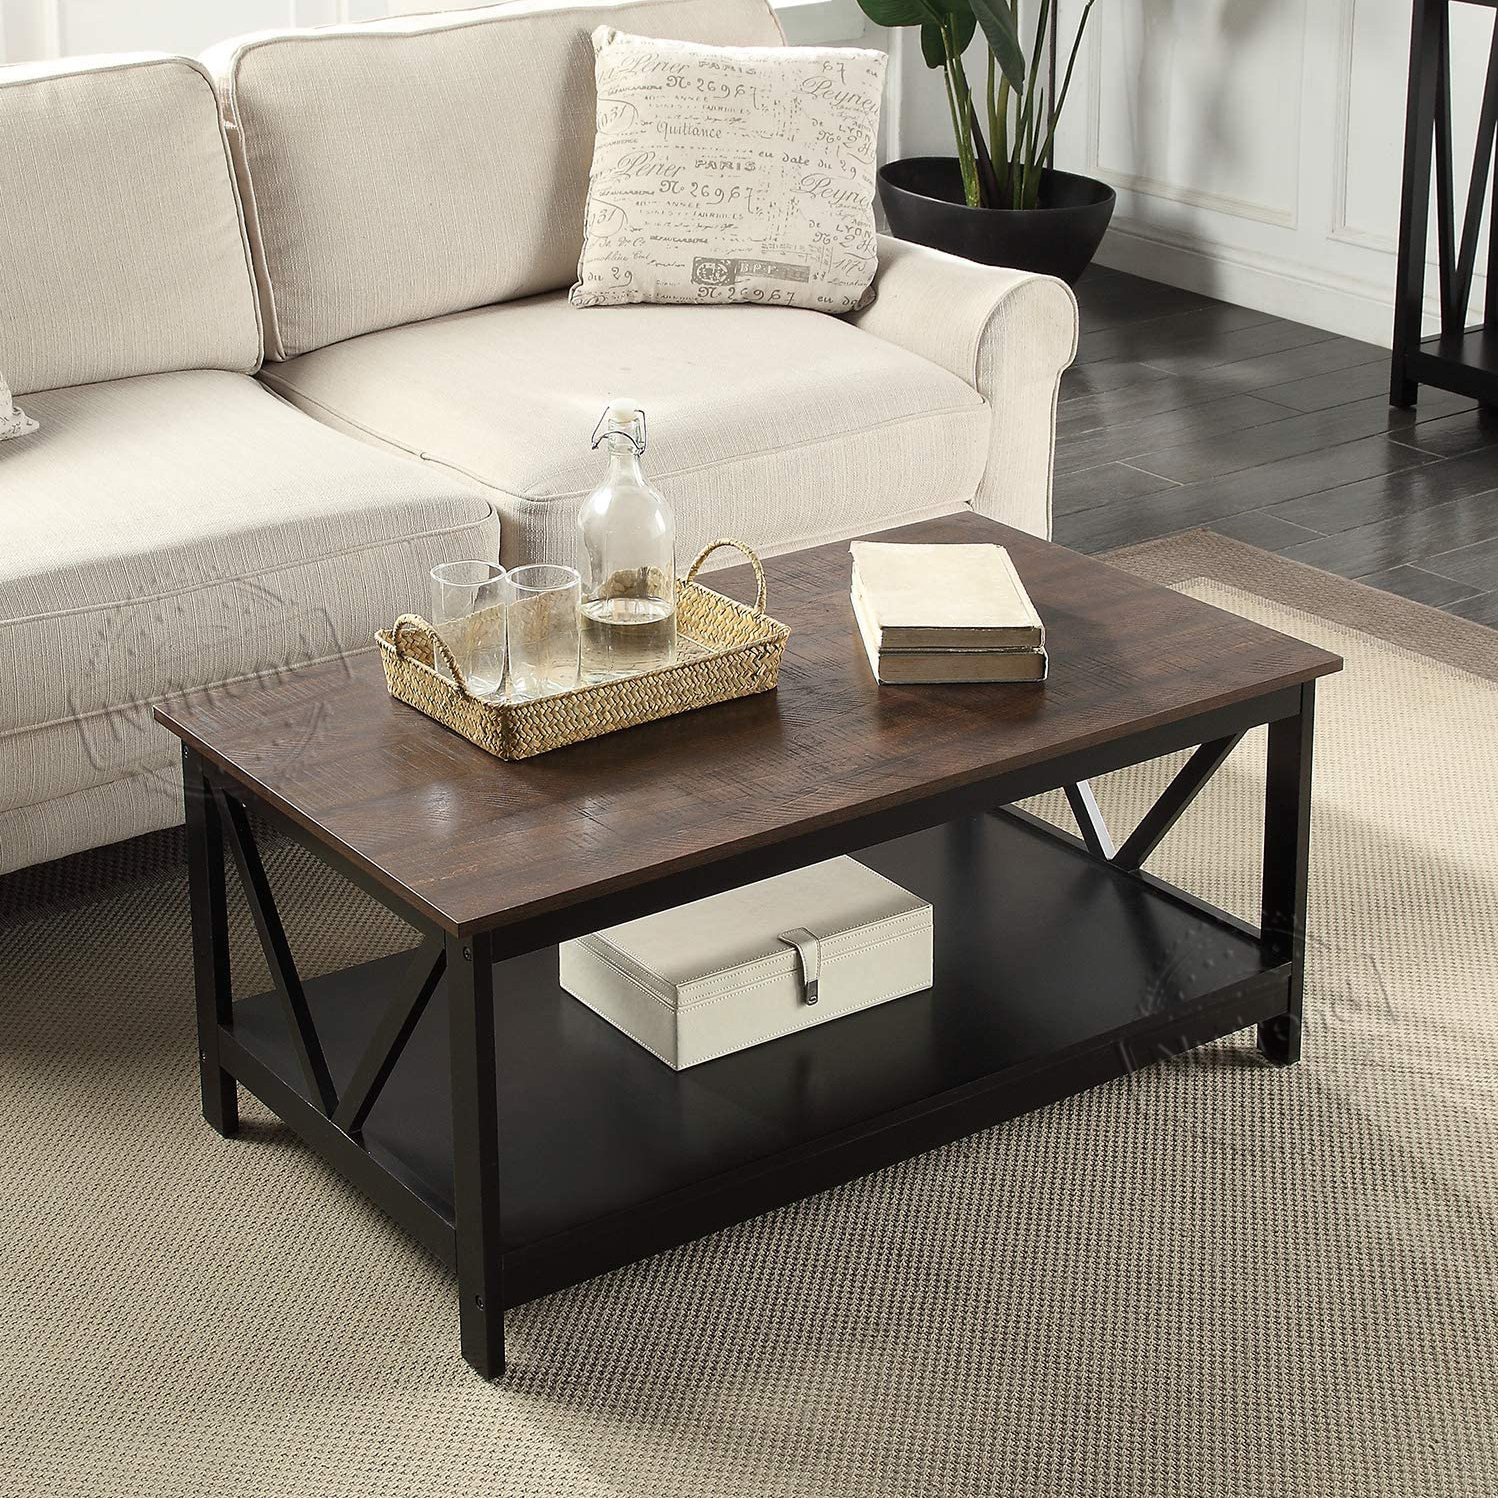 Black Coffee Table with Storage Shelf,Wood Industrial Coffee Tables for Living Room,Small Size 40″ Mid Century Modern 203531